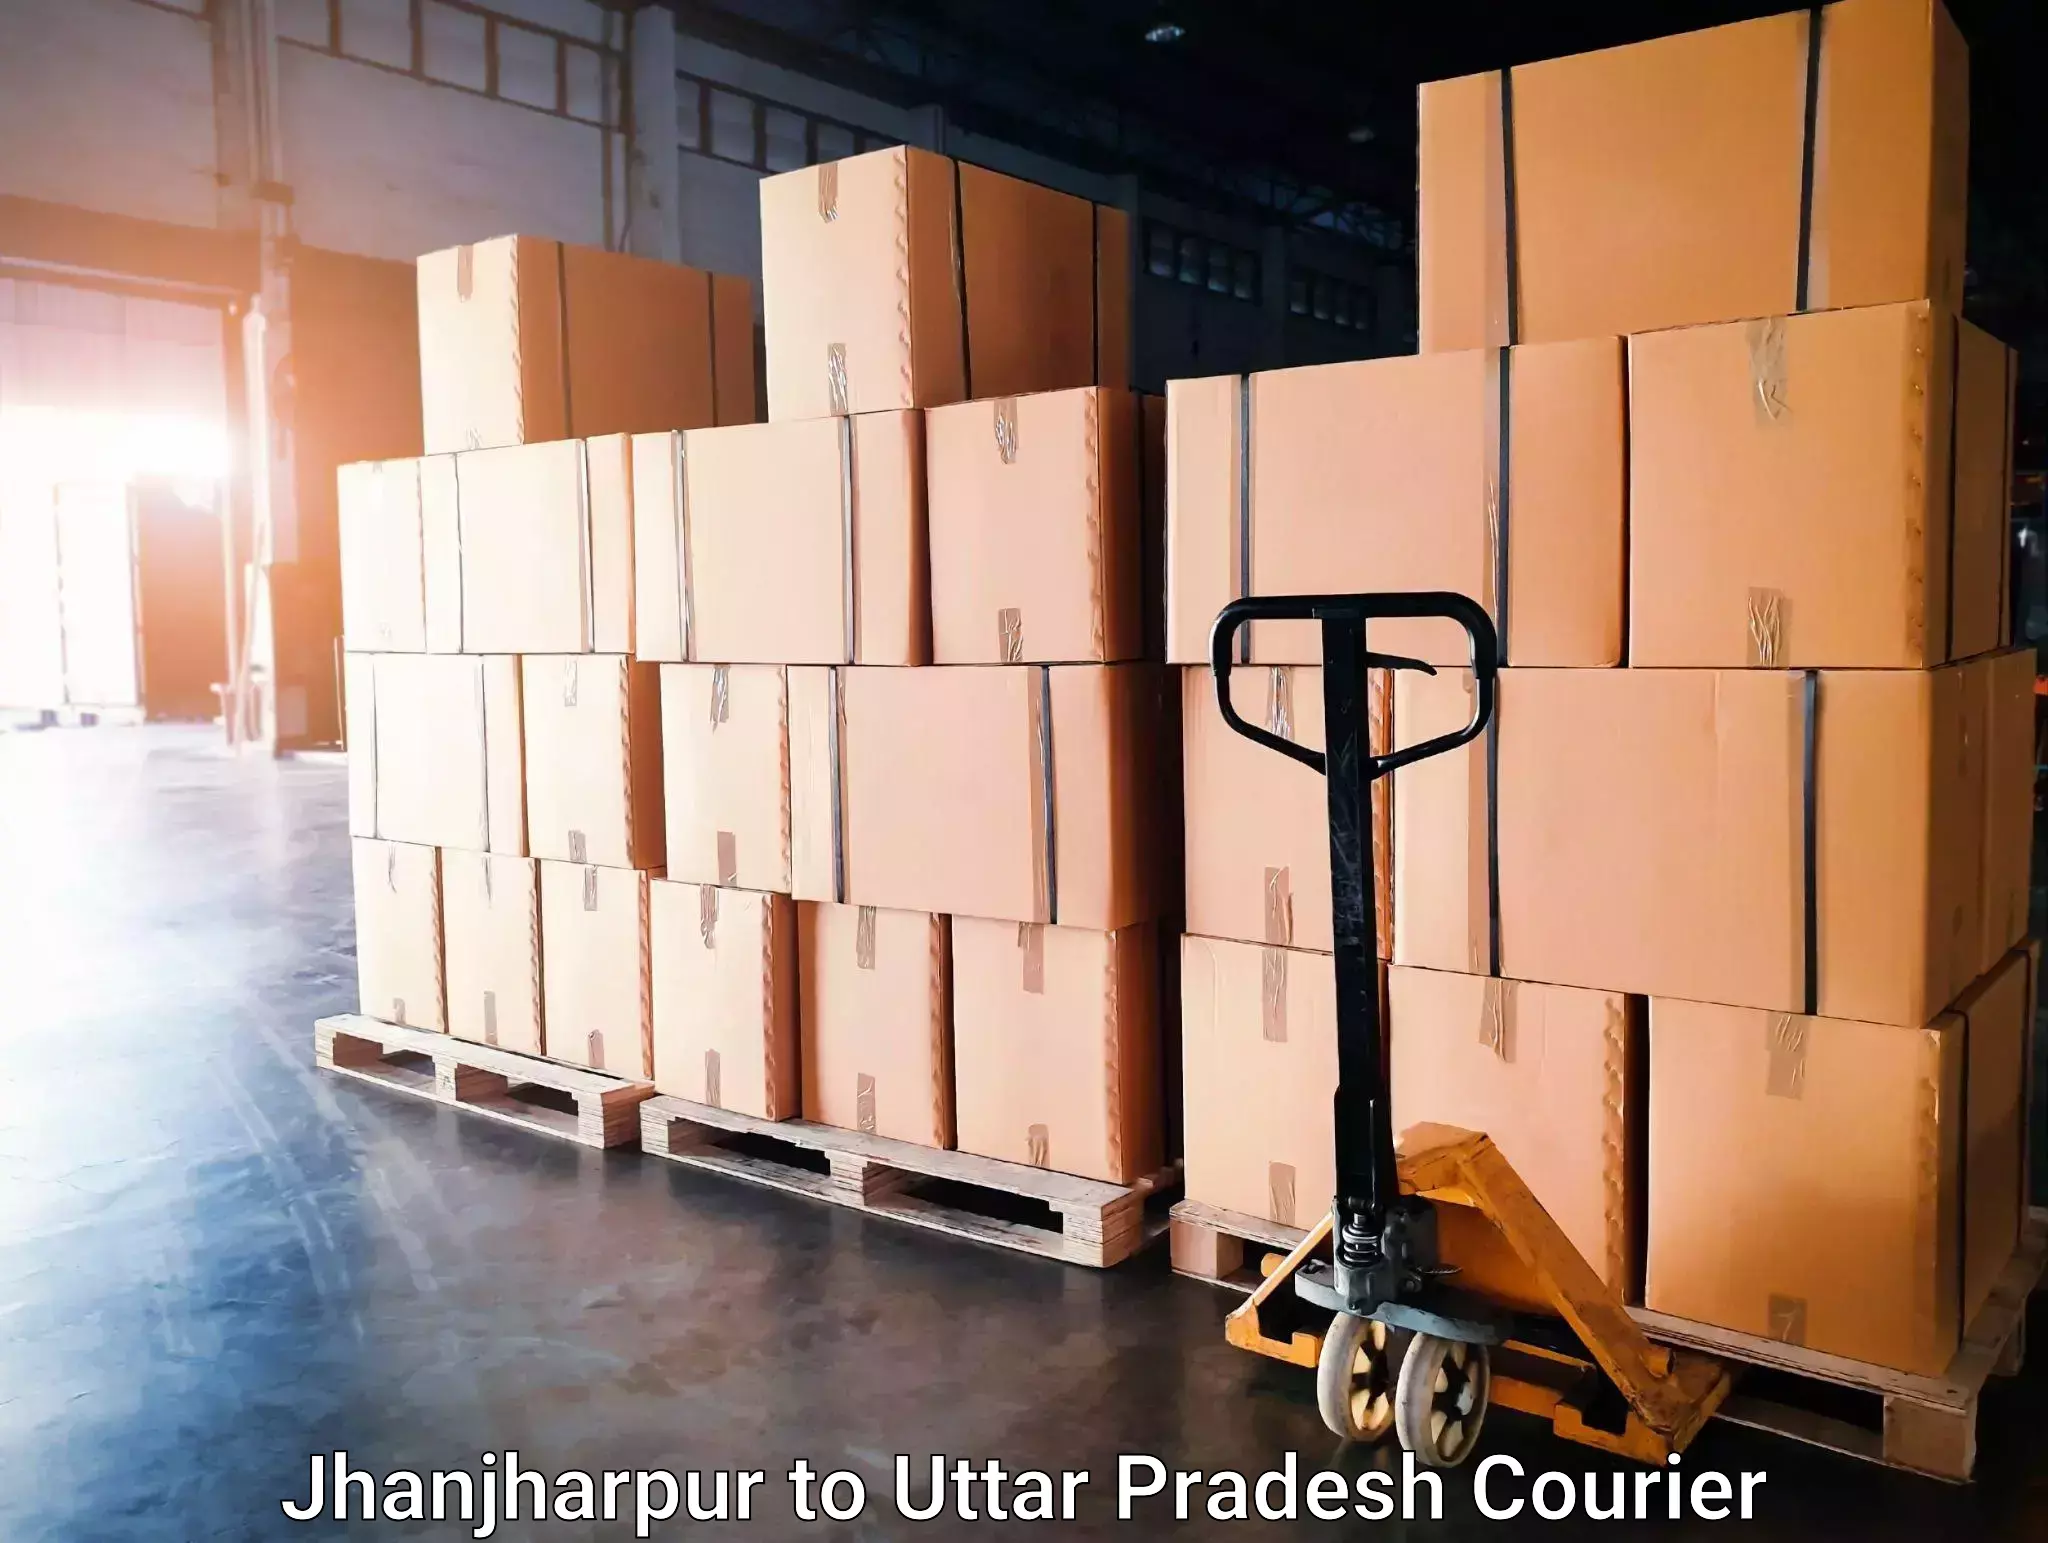 Furniture transport and storage in Jhanjharpur to Bareilly